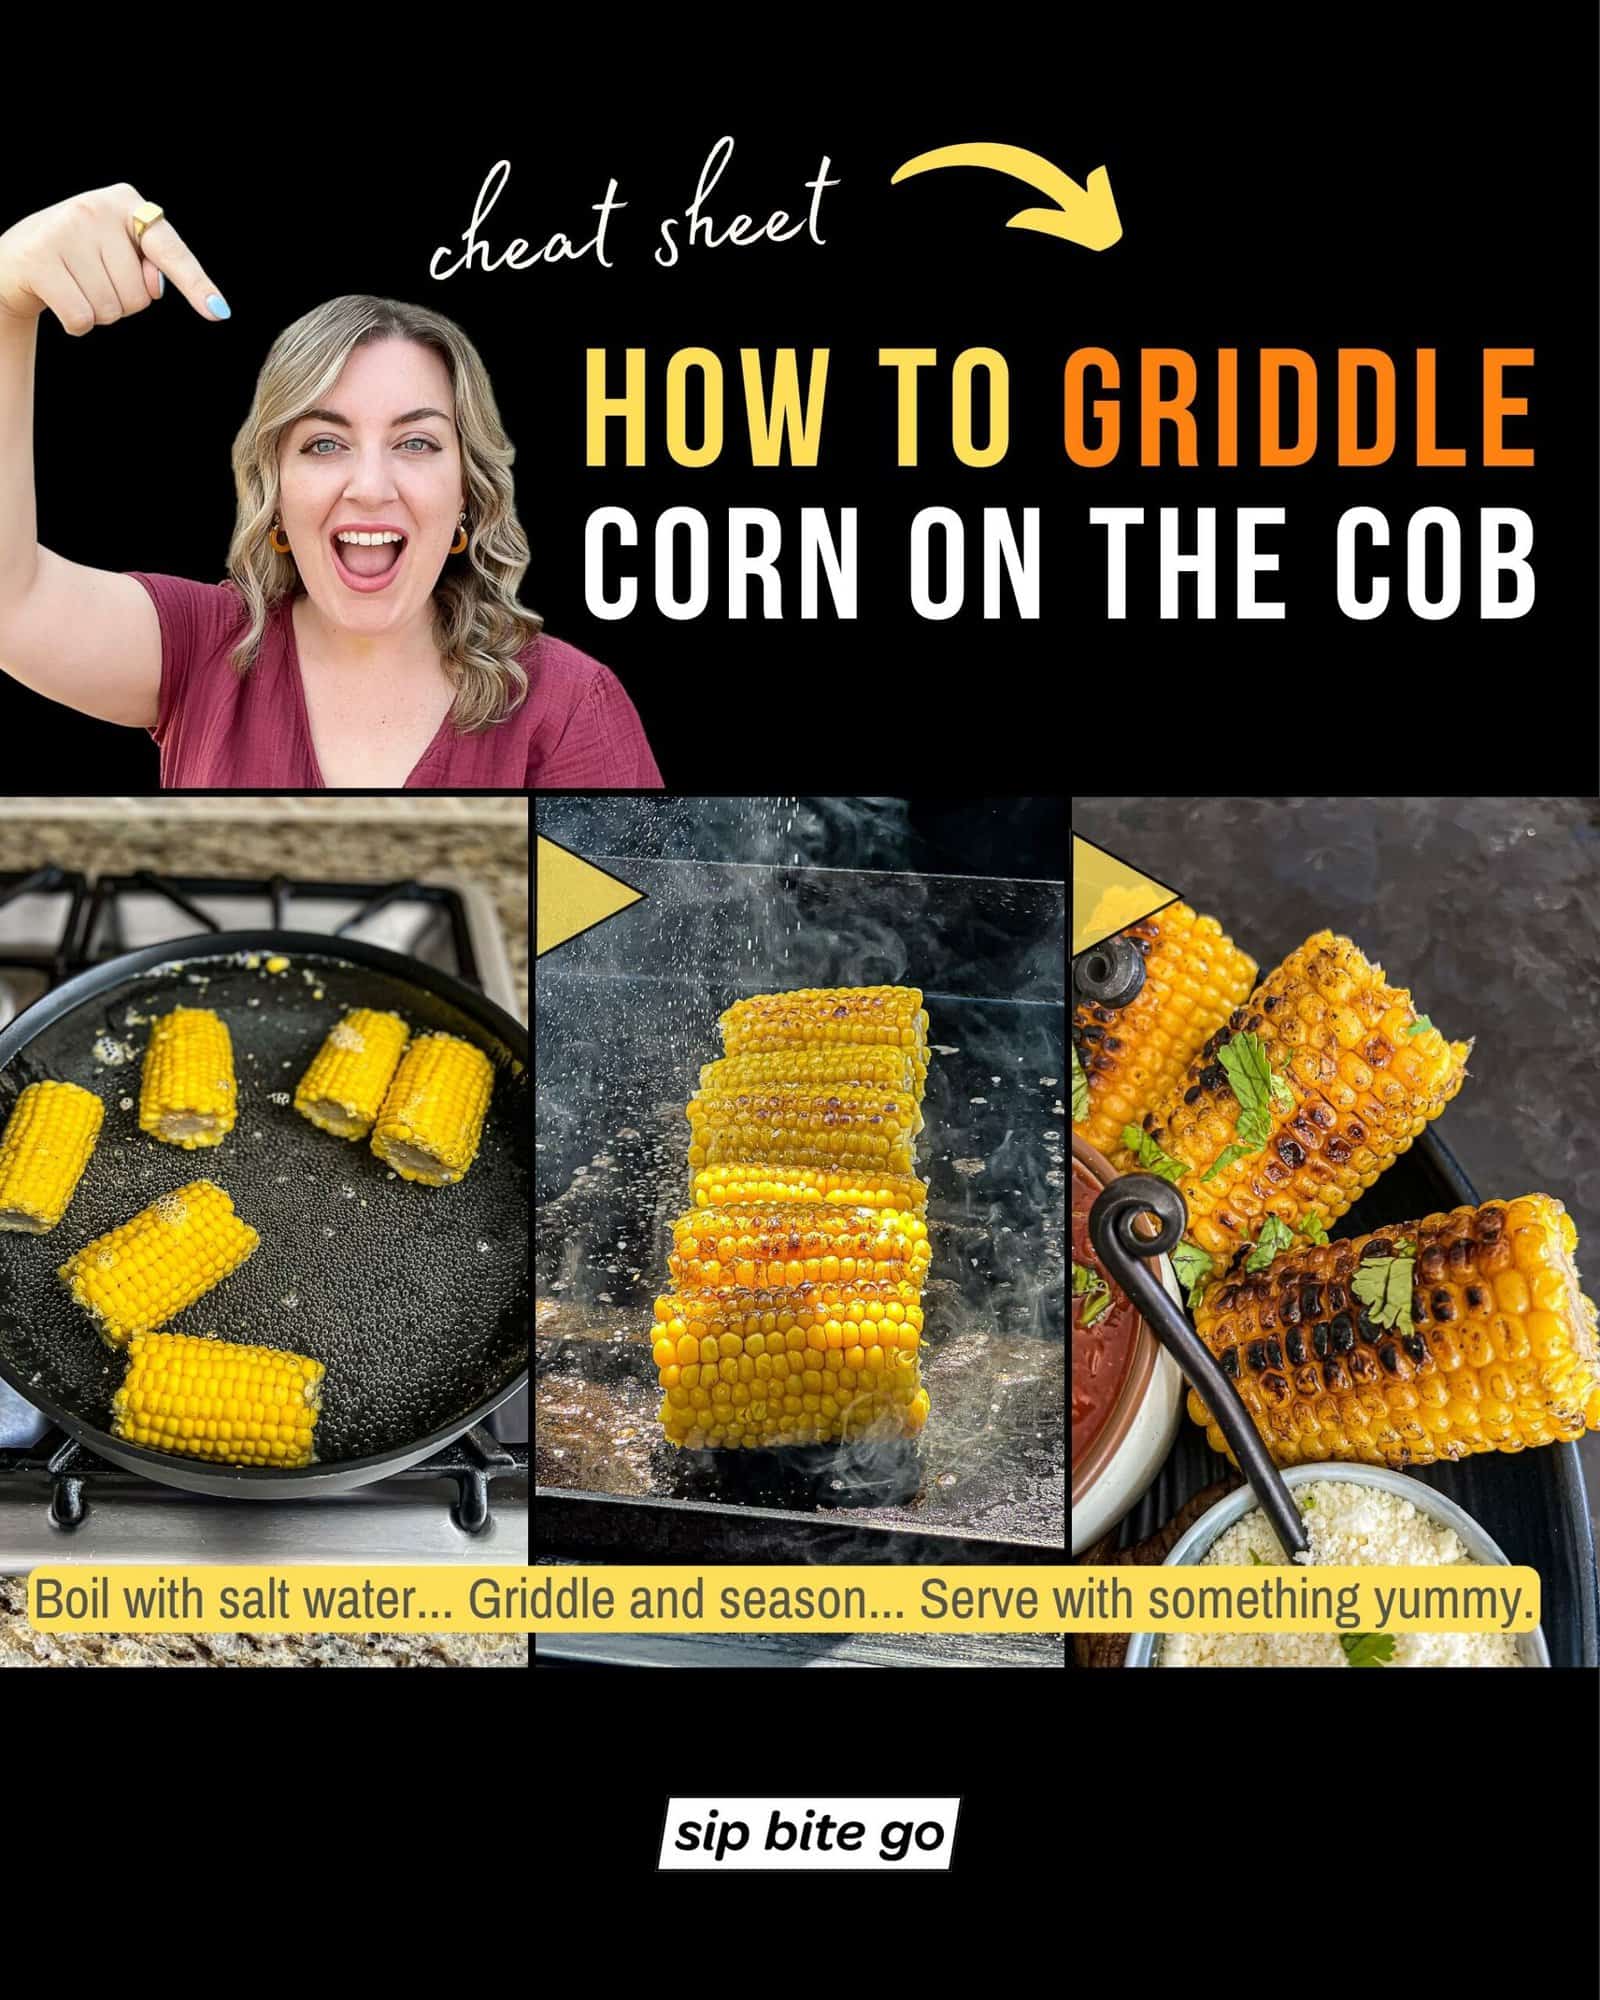 Infographic with recipe steps and captions depicting how to griddle corn on the cob on the Traeger Flatrock Griddle with Jenna Passaro and Sip Bite Go logo